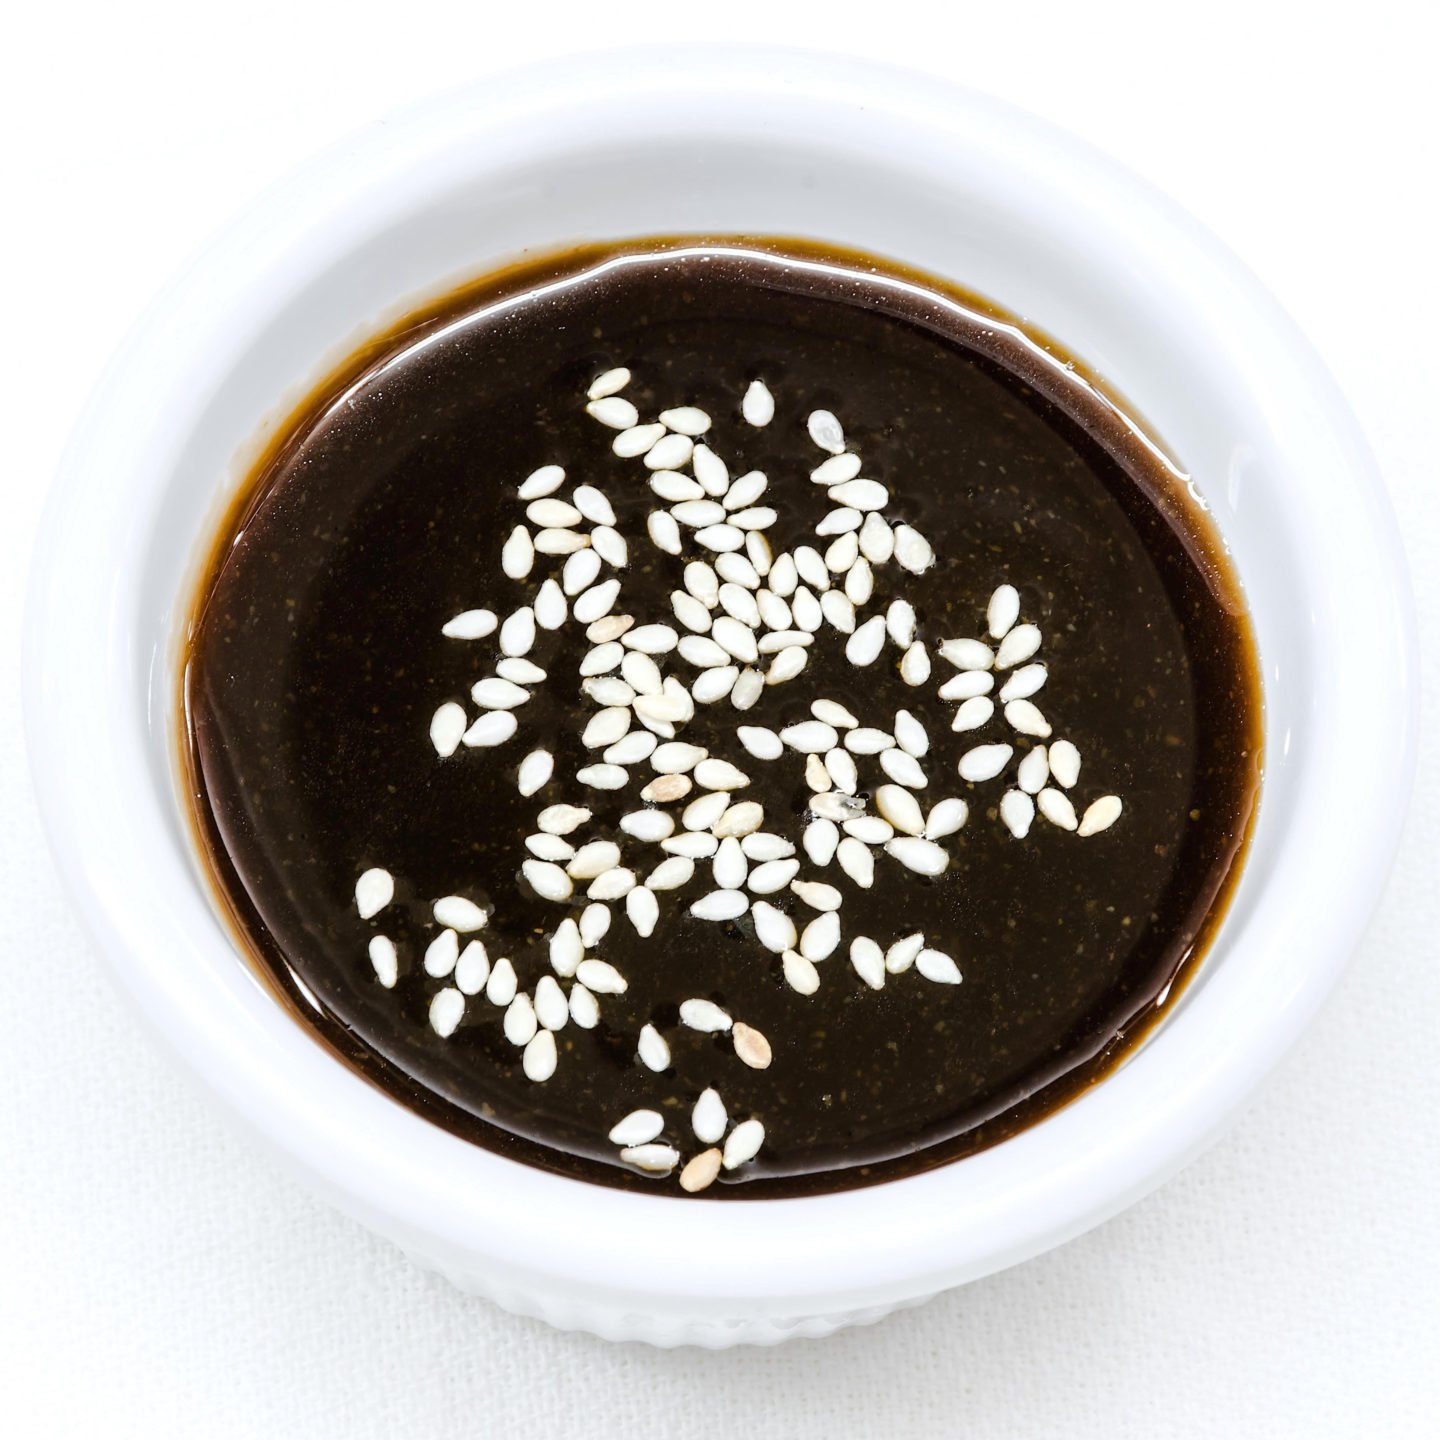 Hoisin Sauce Topped With Sesame Seeds